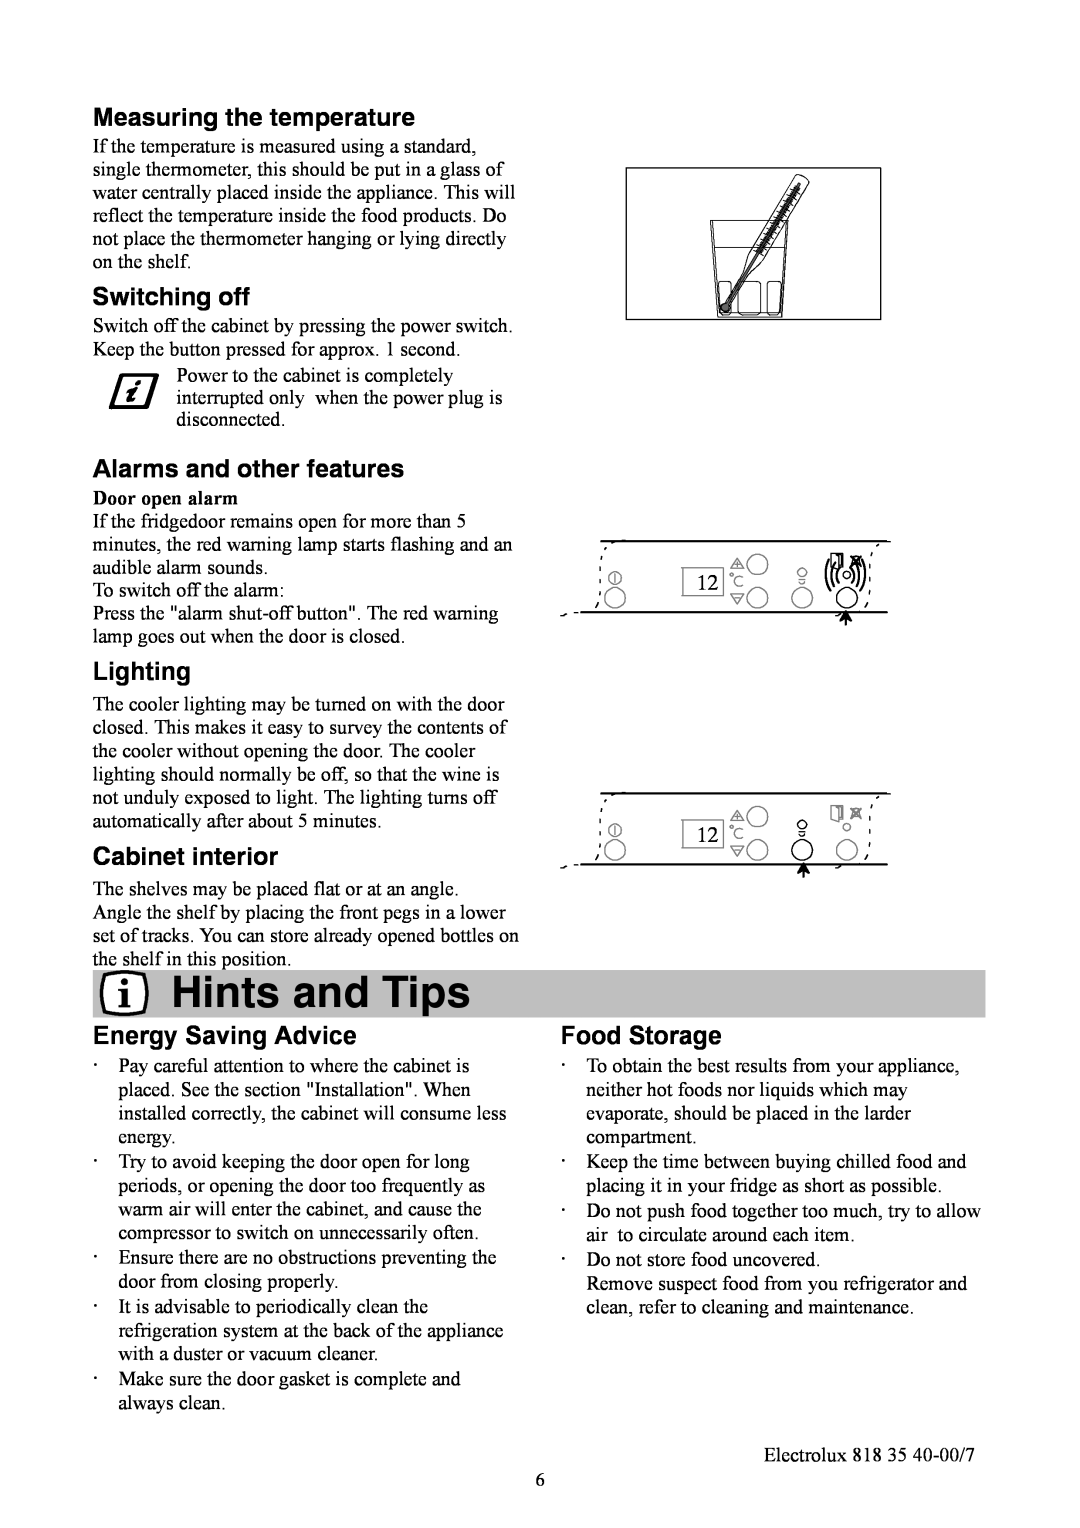 Electrolux ERC3711WS manual Hints and Tips, Measuring the temperature, Switching off, Alarms and other features, Lighting 